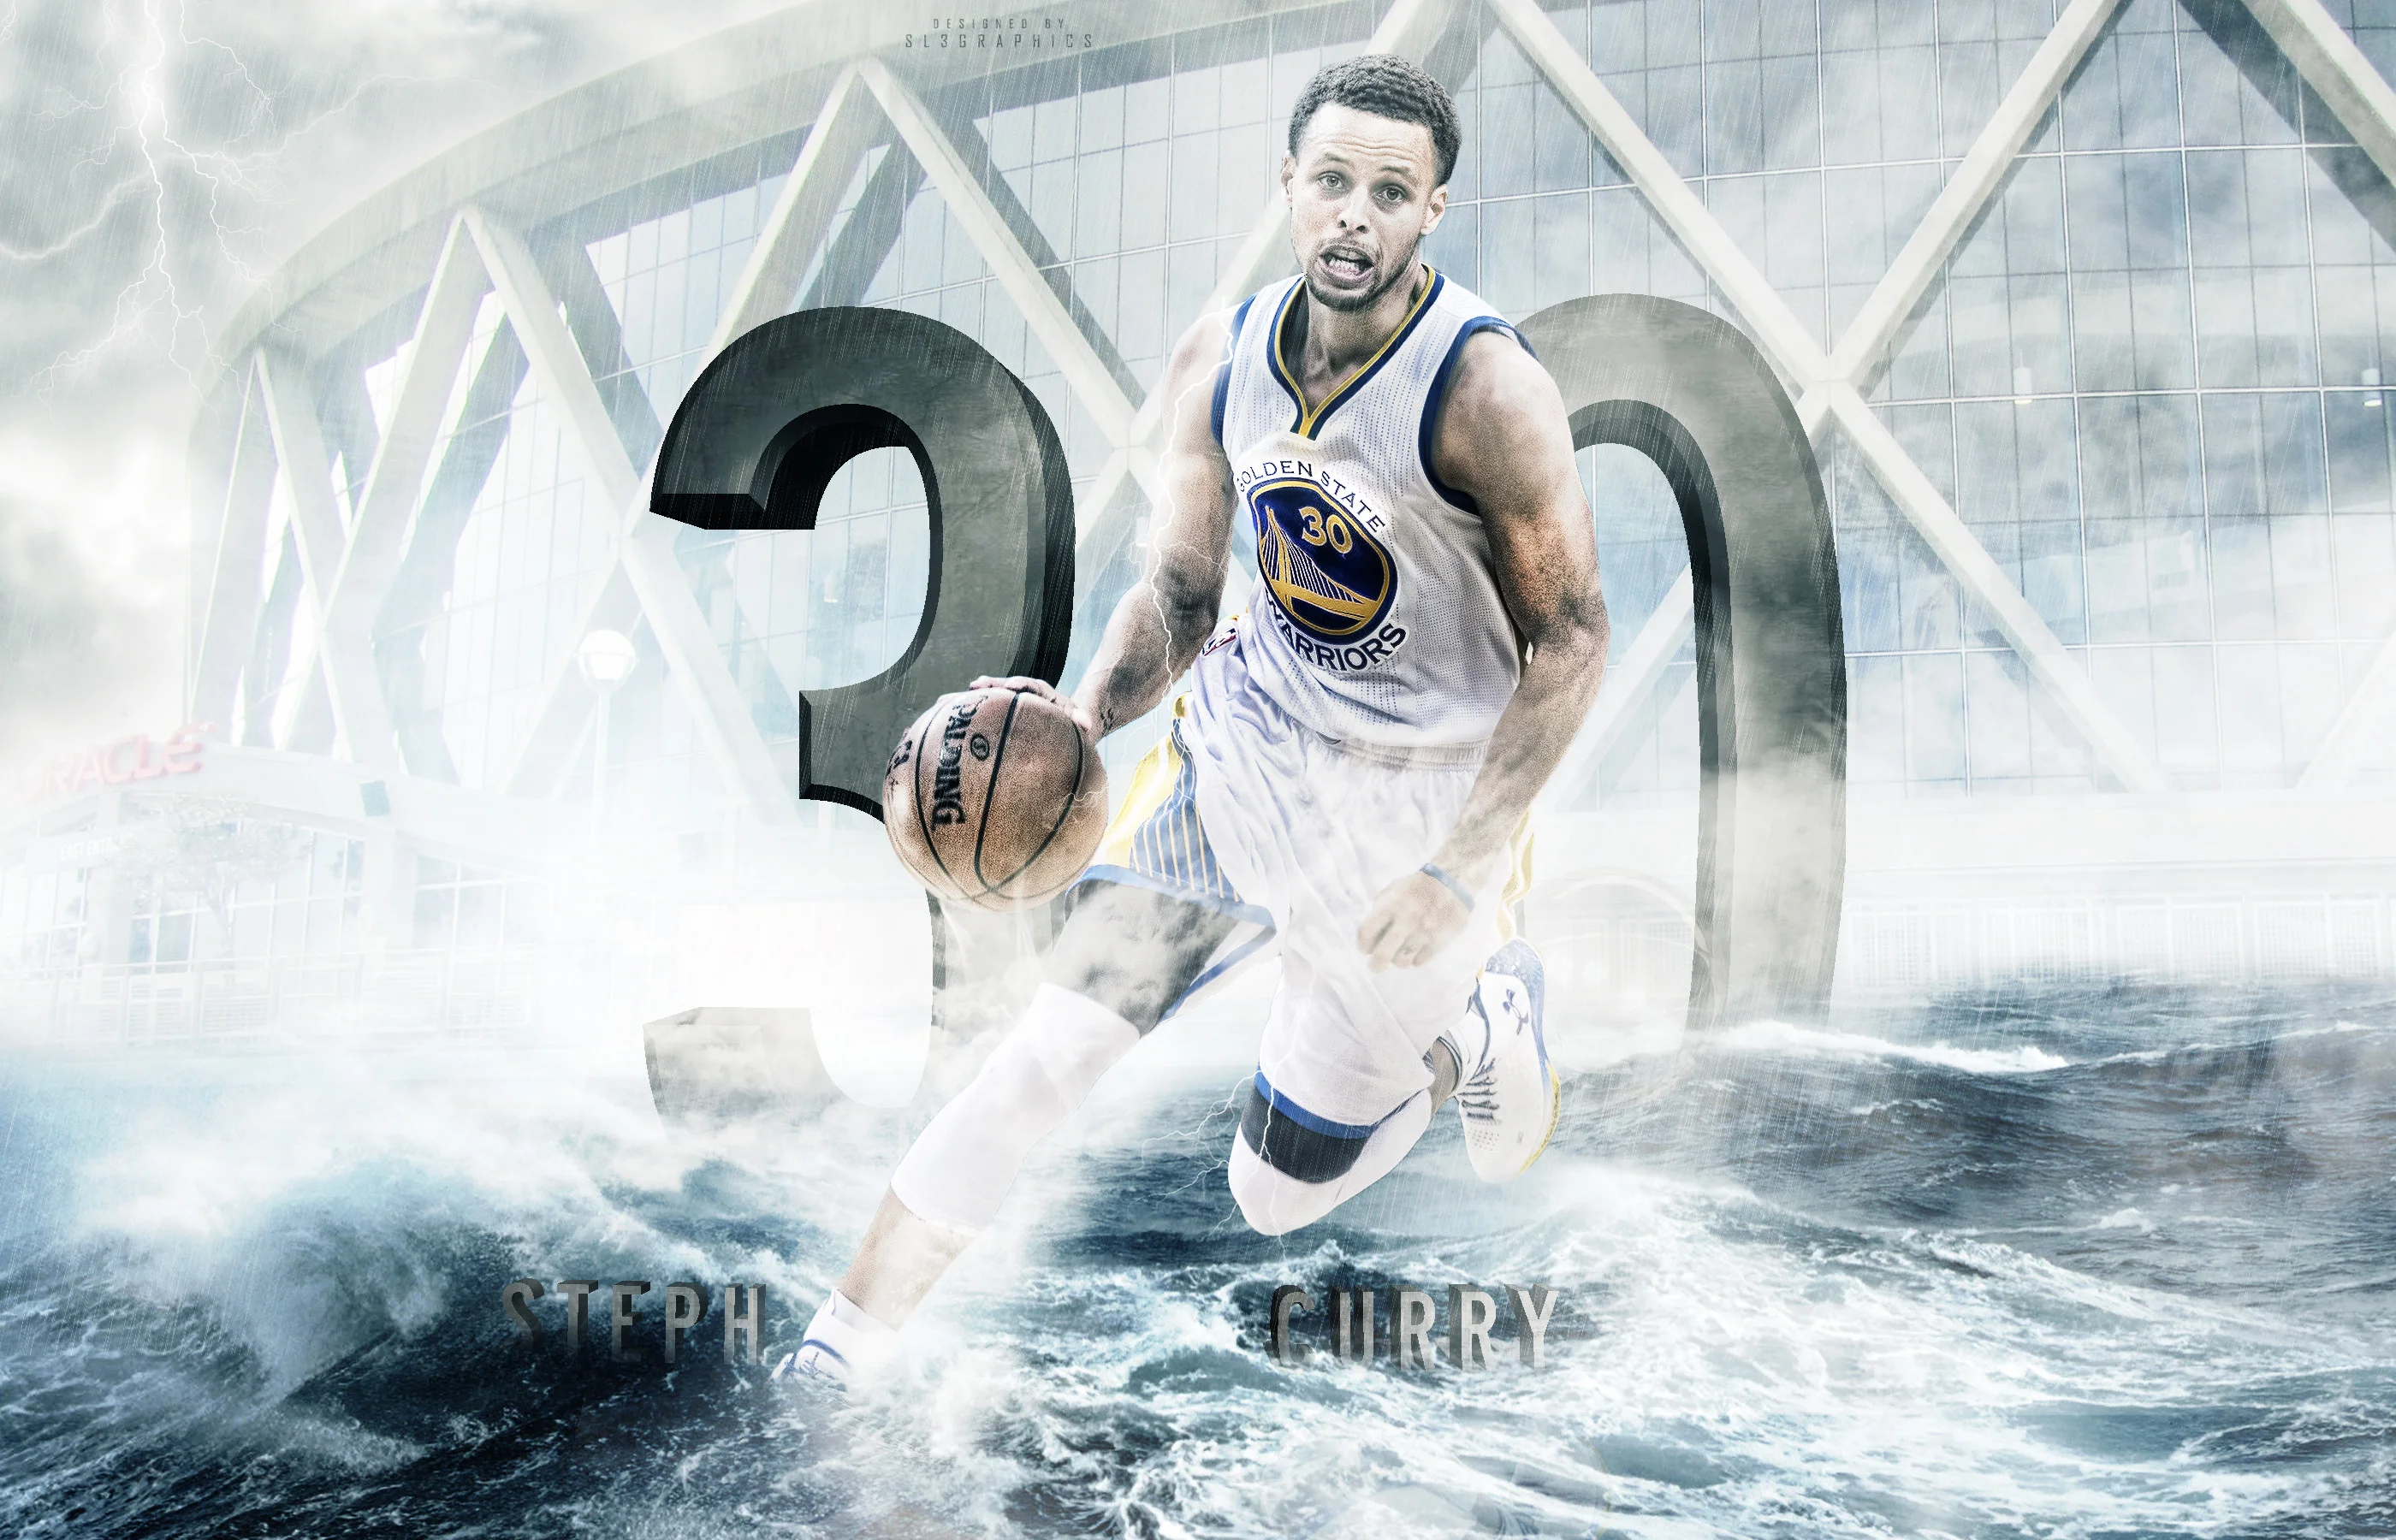 Stephen Curry Wallpaper Free Download, Wallpapers, Backgrounds, Images,  Art Photos.